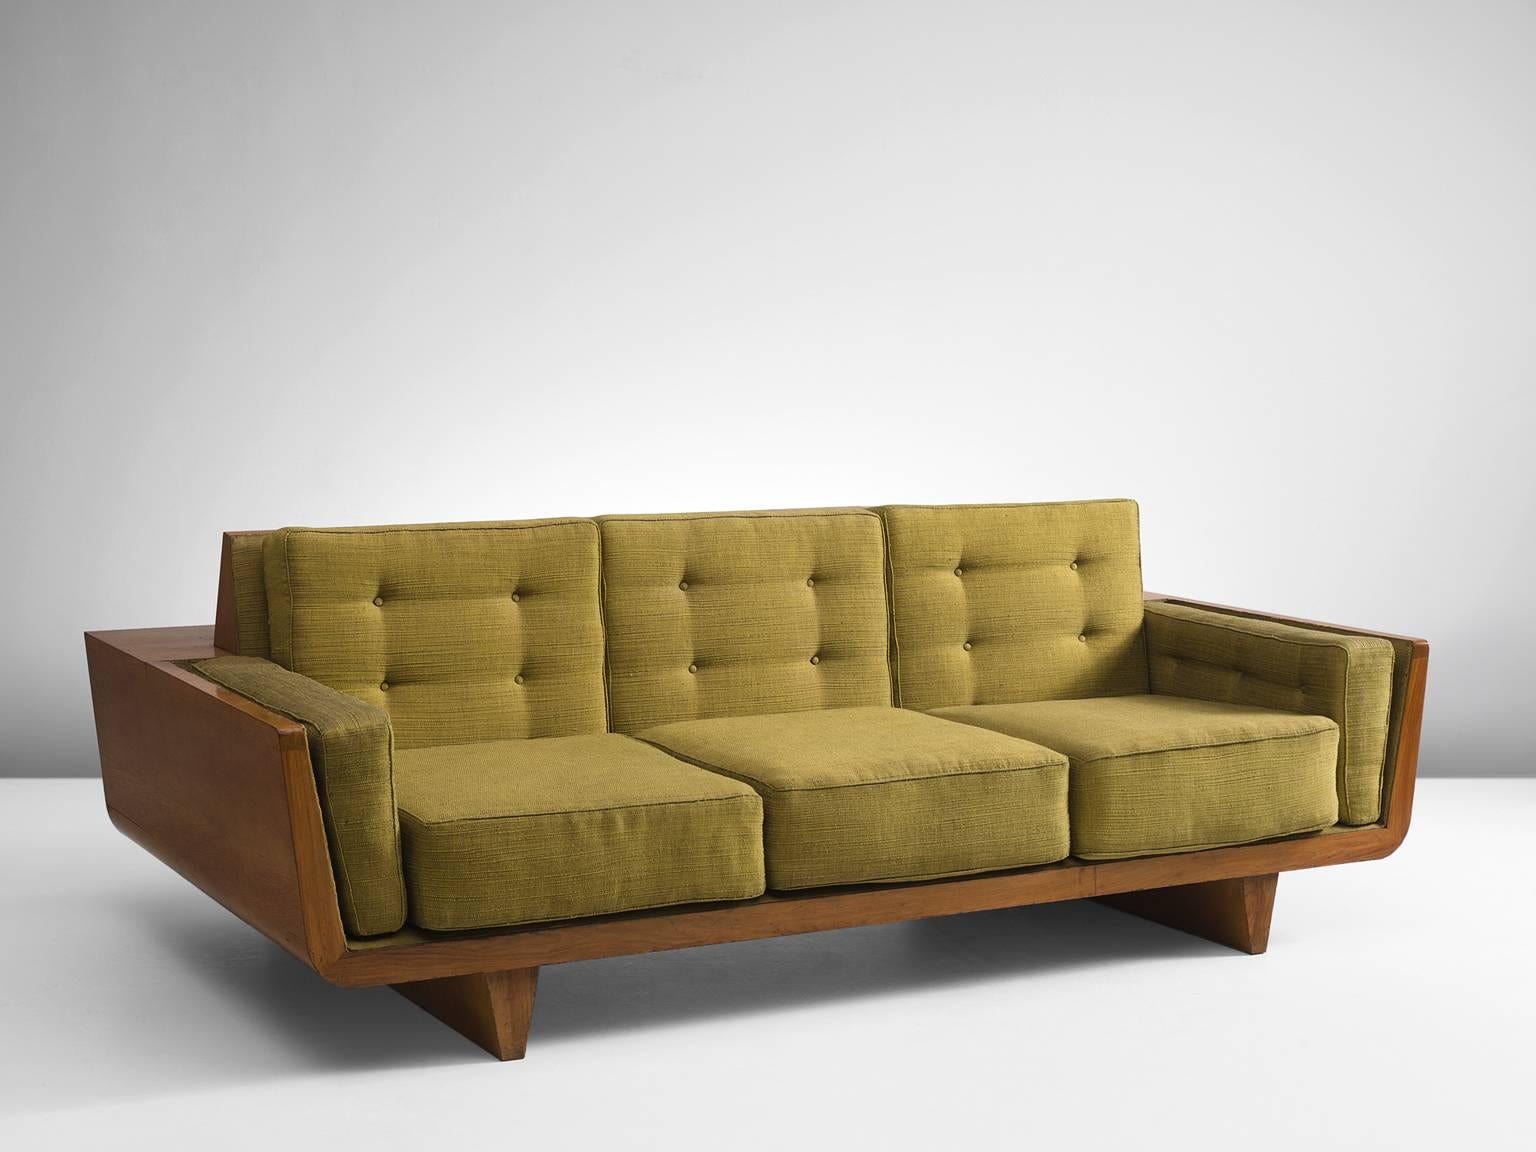 Sofa, walnut wood with green fabric, Italy, circa 1950.

This sculptural sofa is executed with walnut and has several removable cushions that are covered in a green fabric. The frame of the sofa is geometric and has pyramid legs that work well